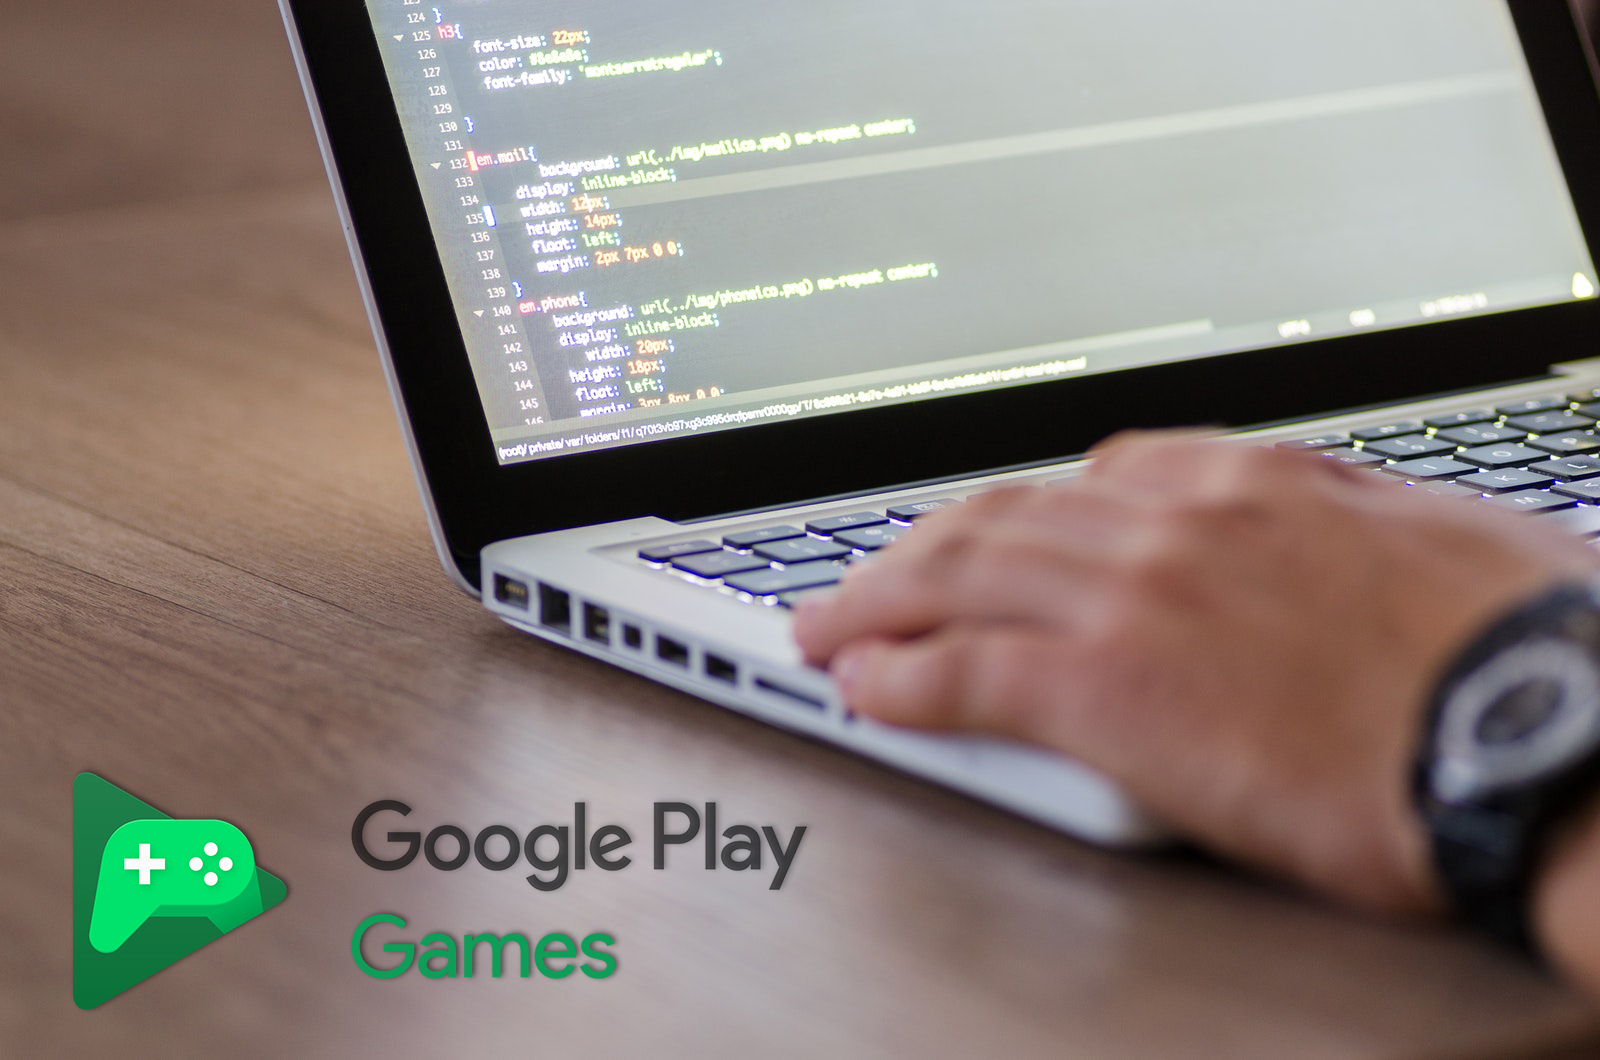 How To Make Games for Android - May 2018